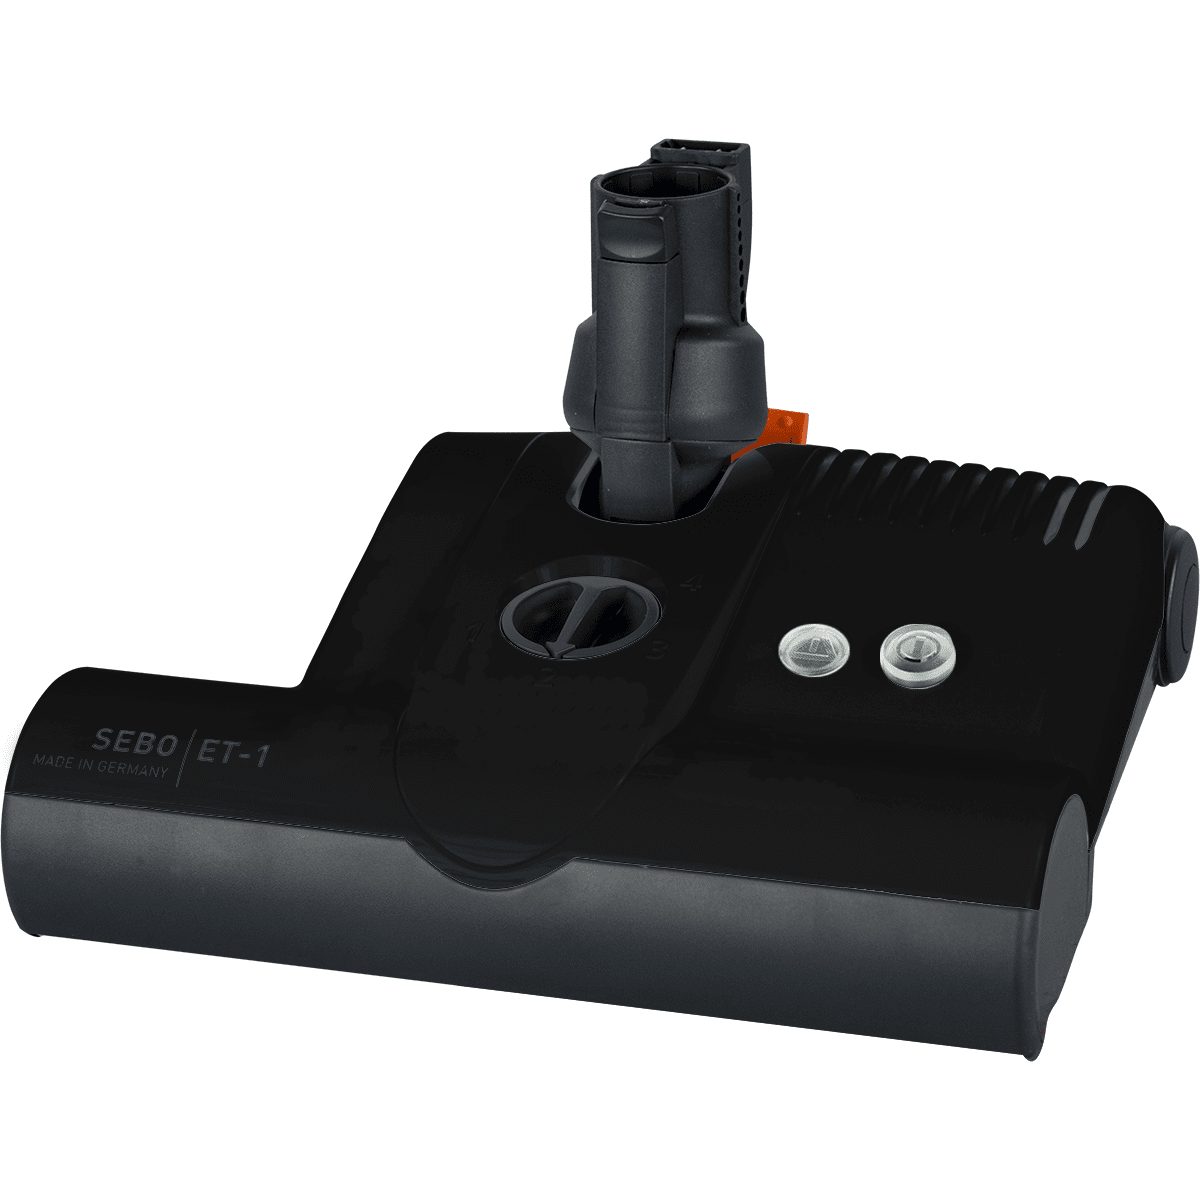 Sebo Et-1 Power Head For K3 And D4 Canister Vacuums - Black